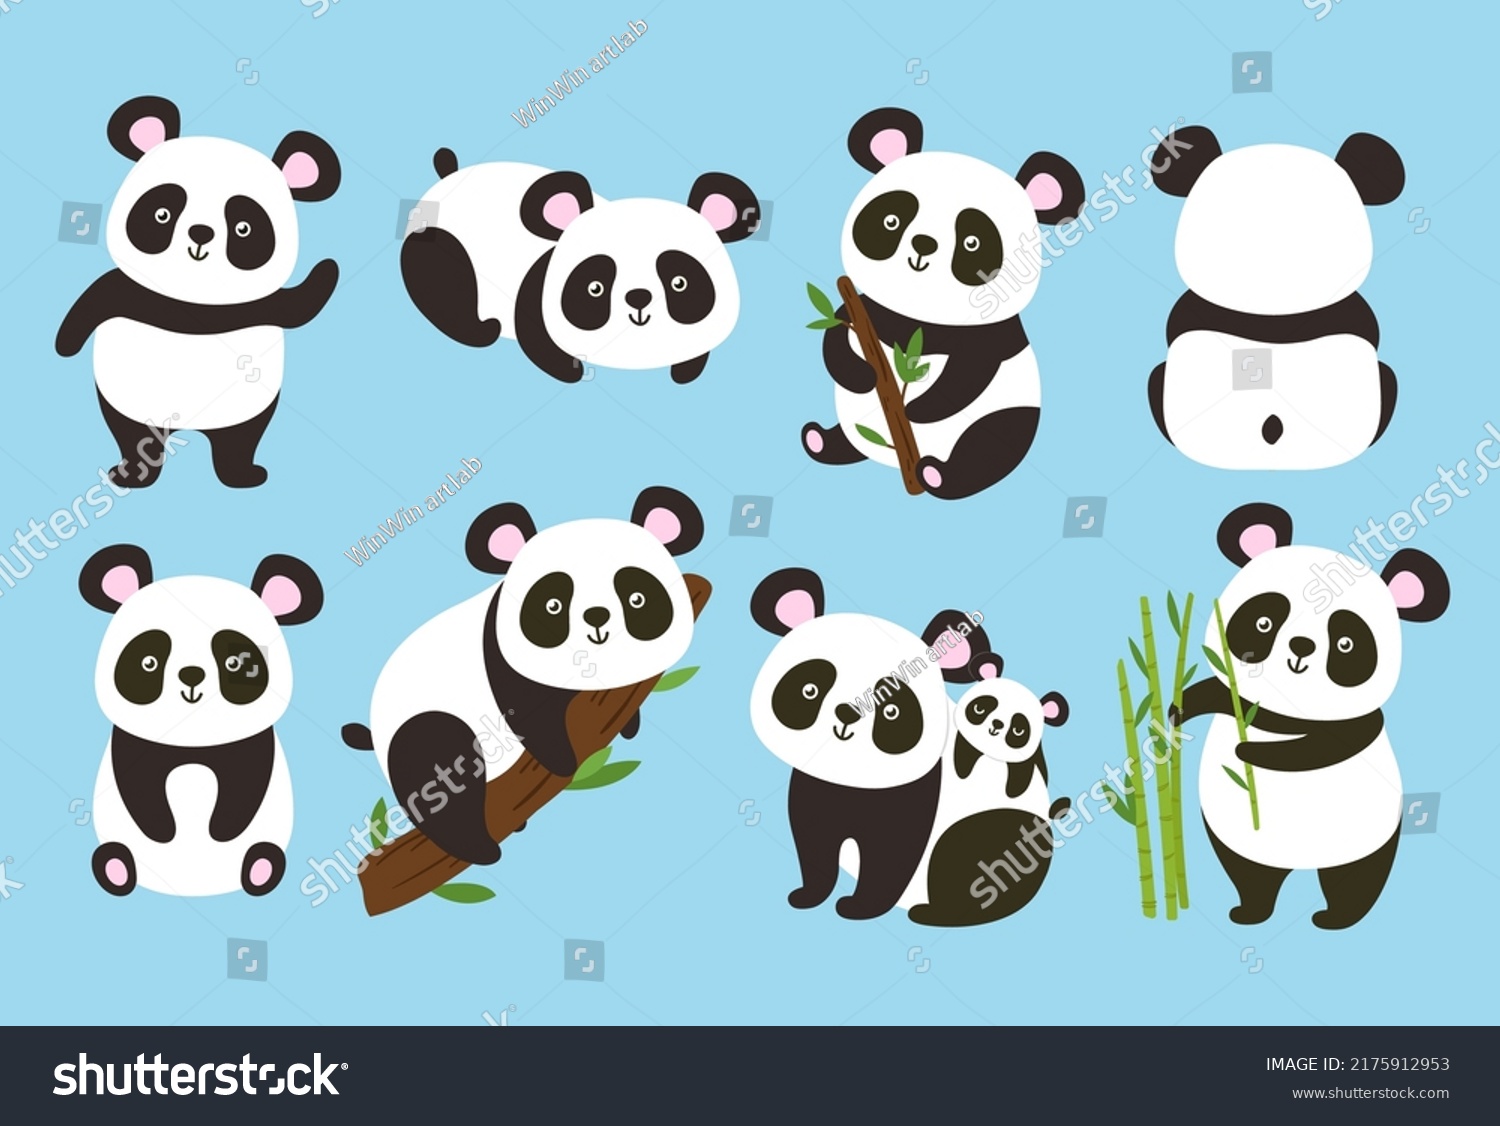 SVG of Cartoon pandas. Cute baby bear with bamboo and tree branches, panda in different poses vector illustration set. Adorable asian characters eating leaves, animal parent sitting with kid on back svg